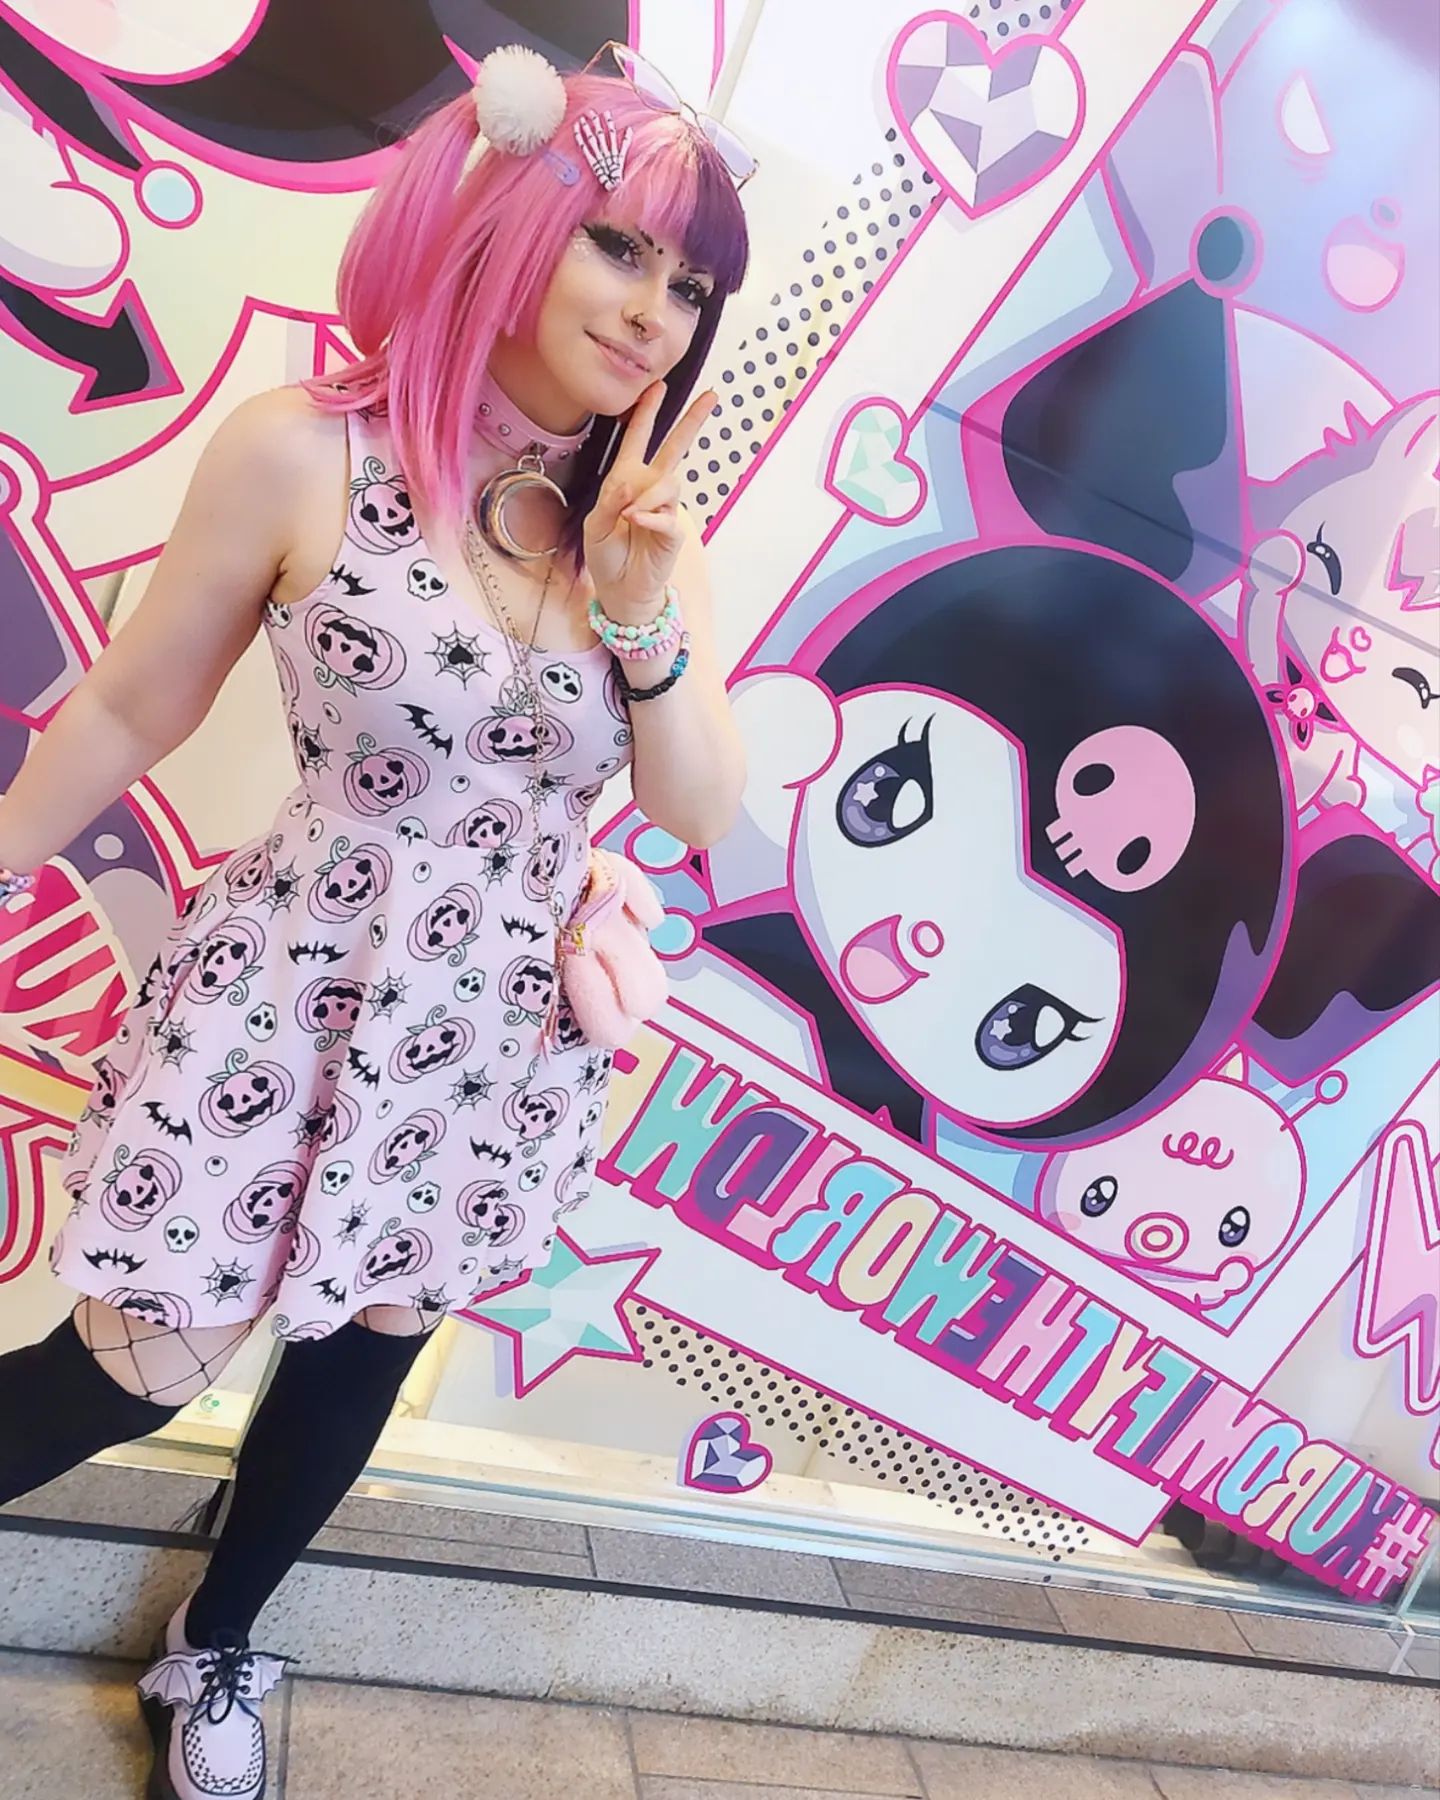 This is a sign to get your Valentine a Sanrio plushie theme'd flower boutique for Valentines Day 💝 I don't make the rules.

#harajuku #tokyo #japan #takeshitastreet #pastel #goth #kuromifytheworld #kuromi #halloween #party #sanrio #store #kawaii